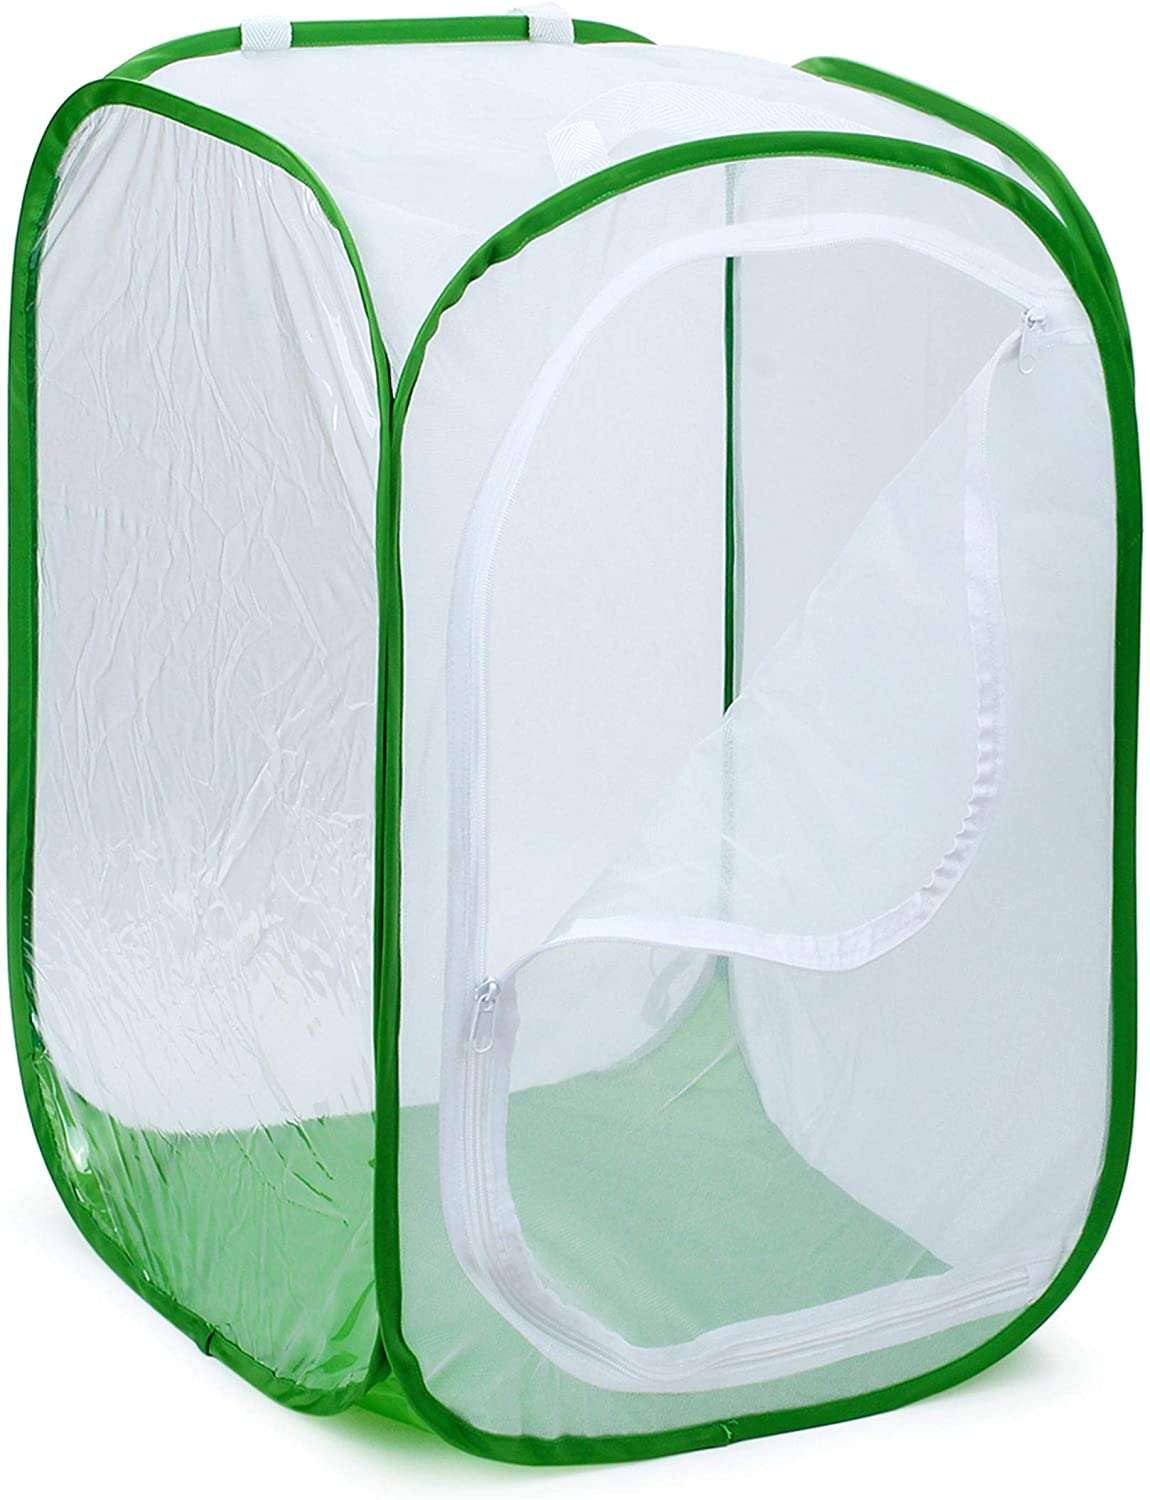 36"_large_collapsible_insect_mesh_cage_terrarium_pop-up_24_x_24_x_36_inches